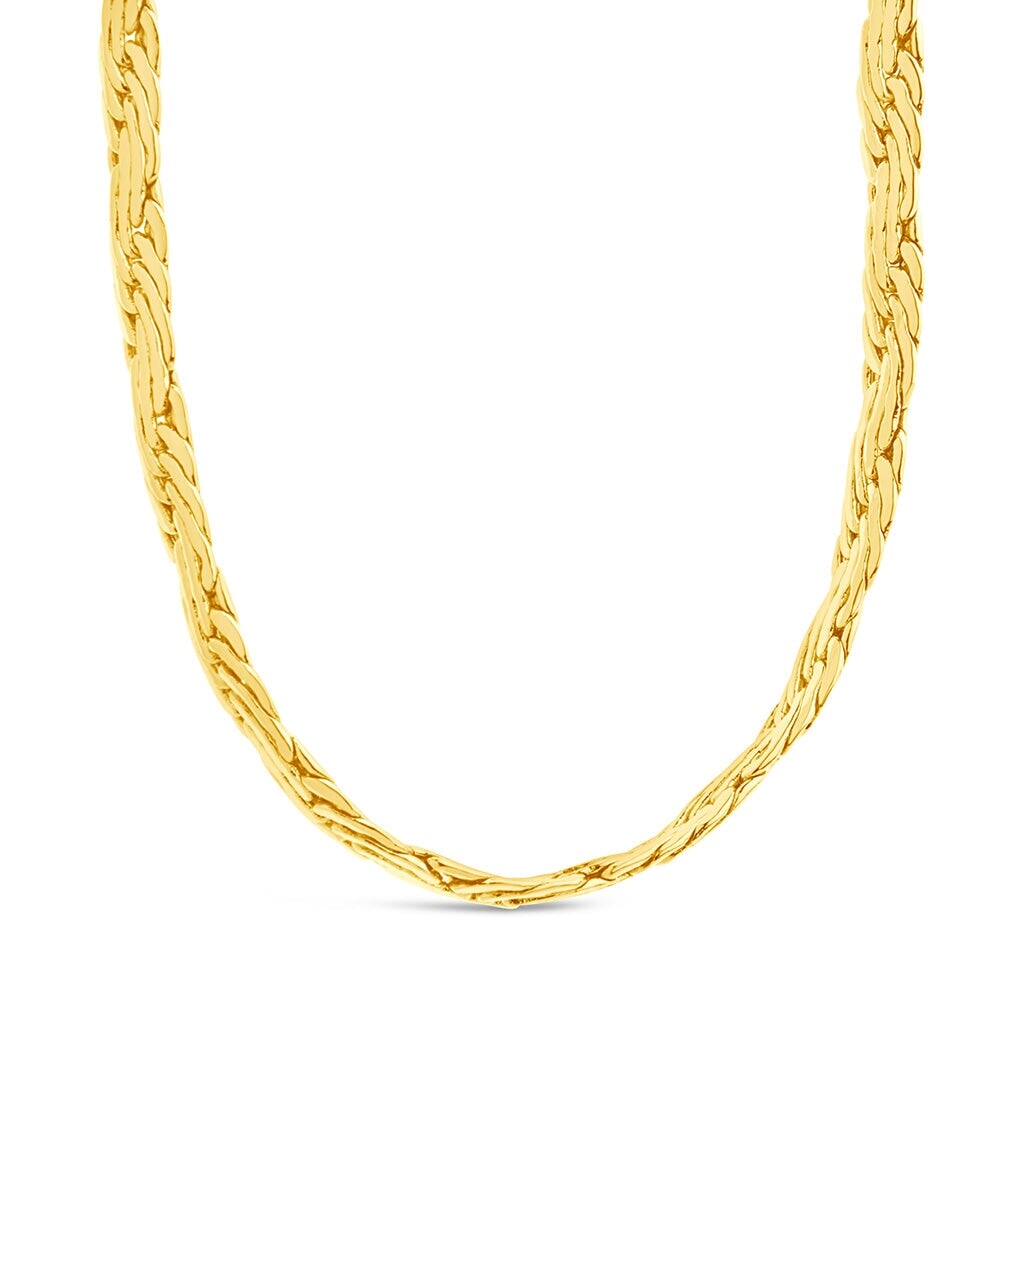 Men's Flat Wheat Chain Necklace Necklace Sterling Forever Gold 